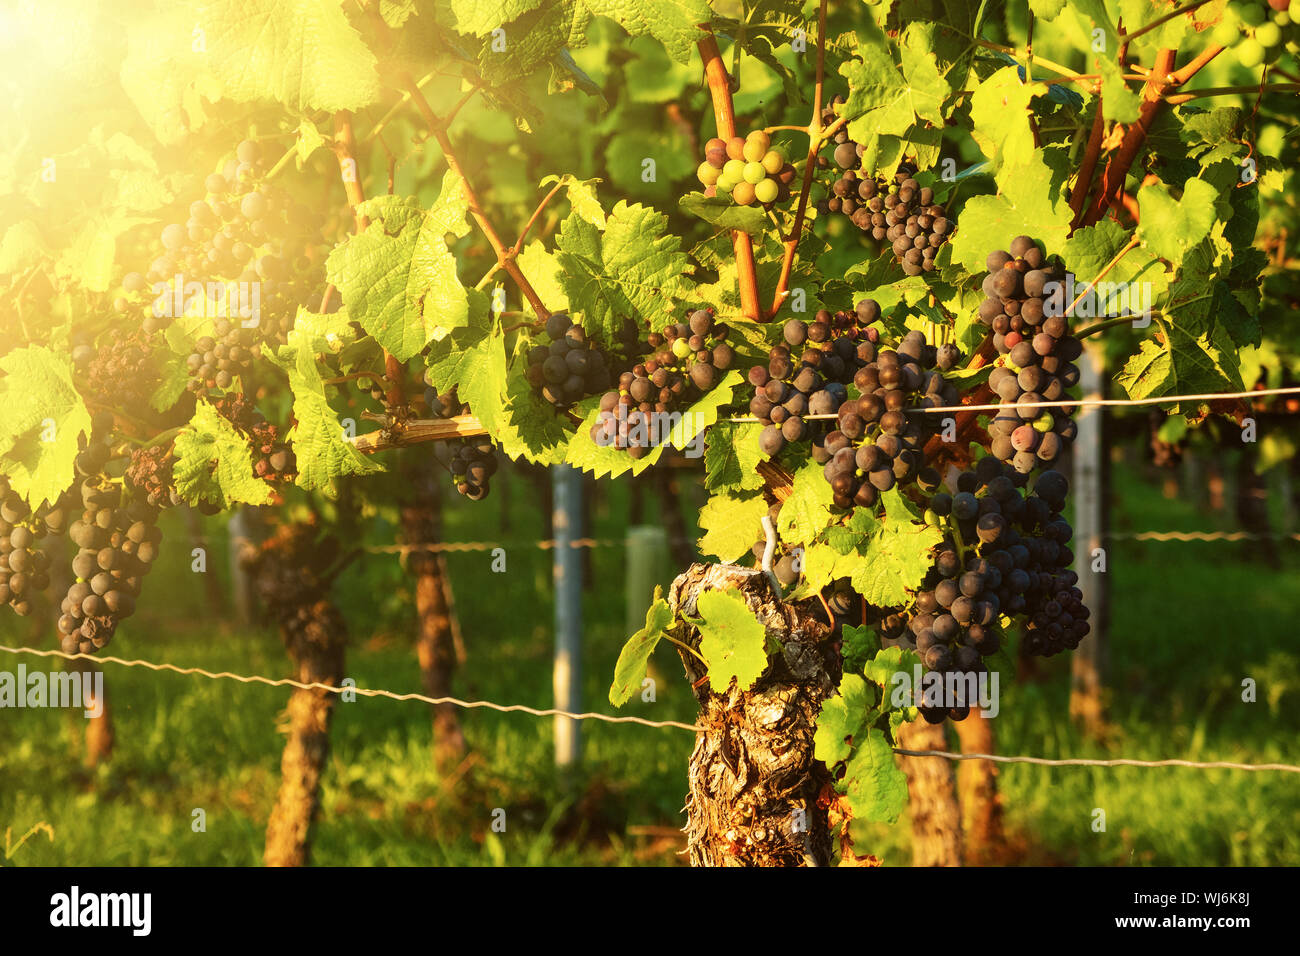 vine plant and ripe wine grapes in vineyard on sunny day Stock Photo